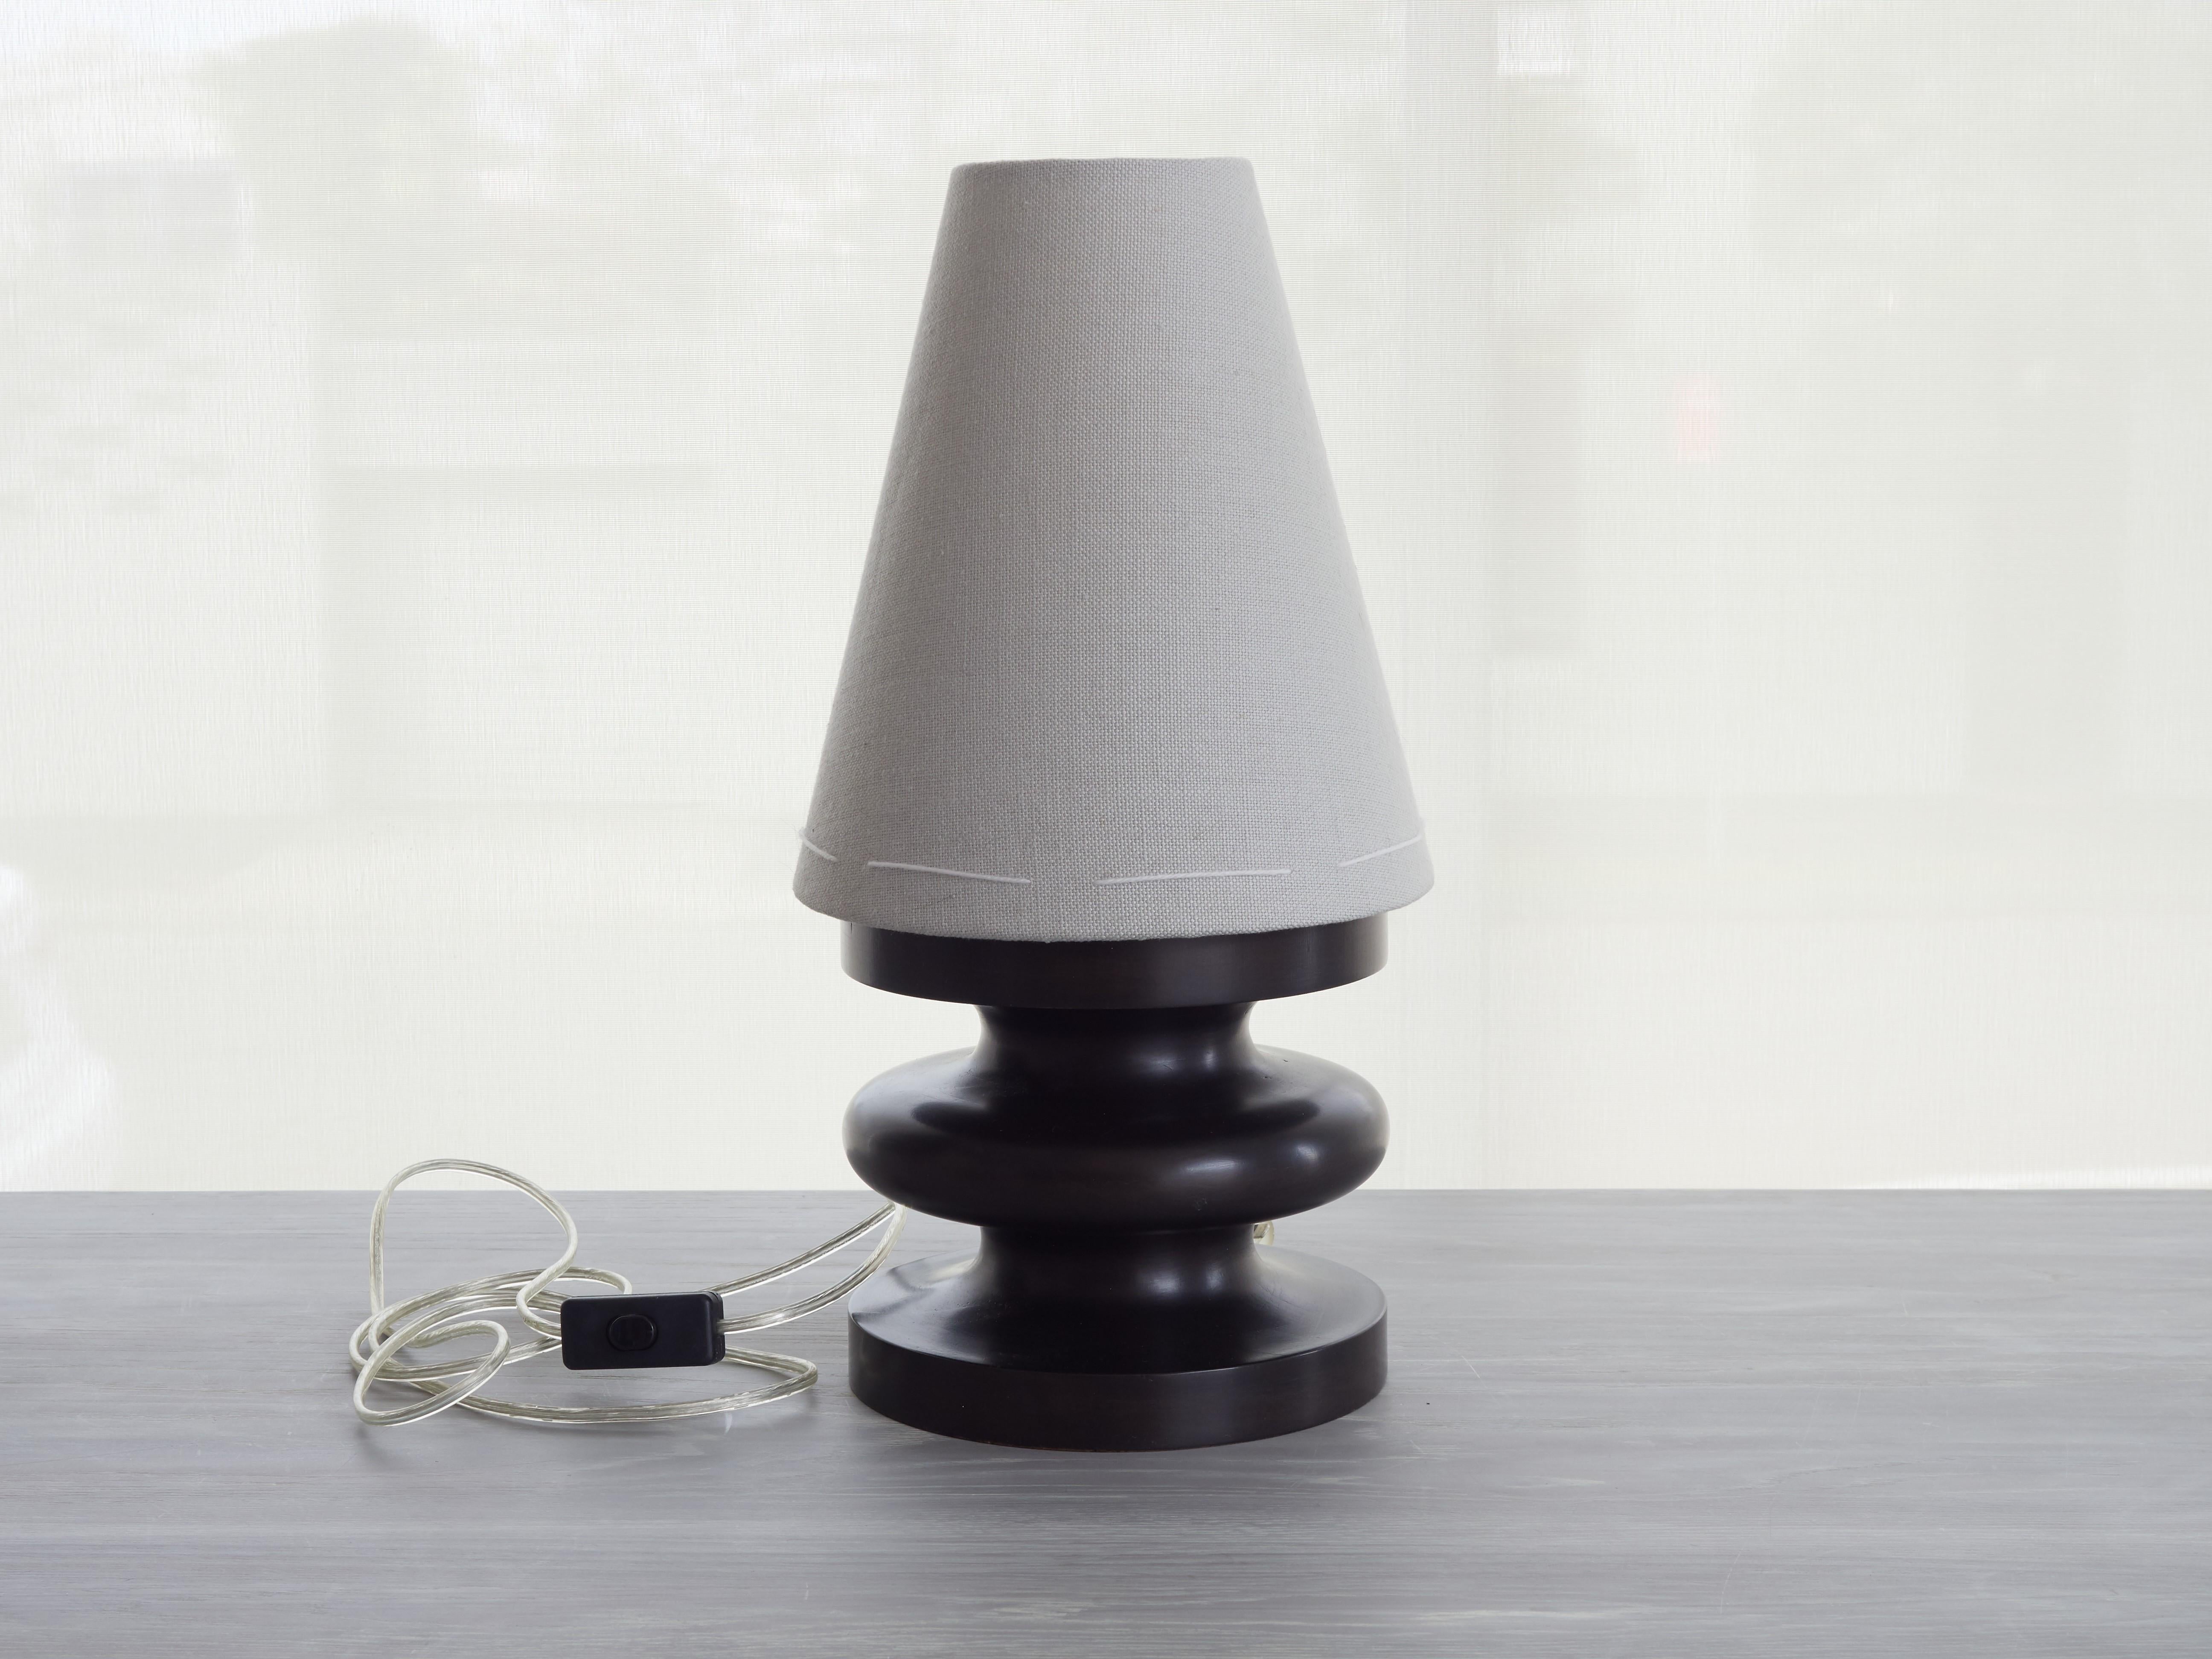 This original sculptural, truly artisanal small table lamp is a handmade, timeless example of 21st century organic modern design. Its artisanal, sensuous shape, reminiscent of Brancusi's minimal, totemic 20th century sculptures, is designed and made